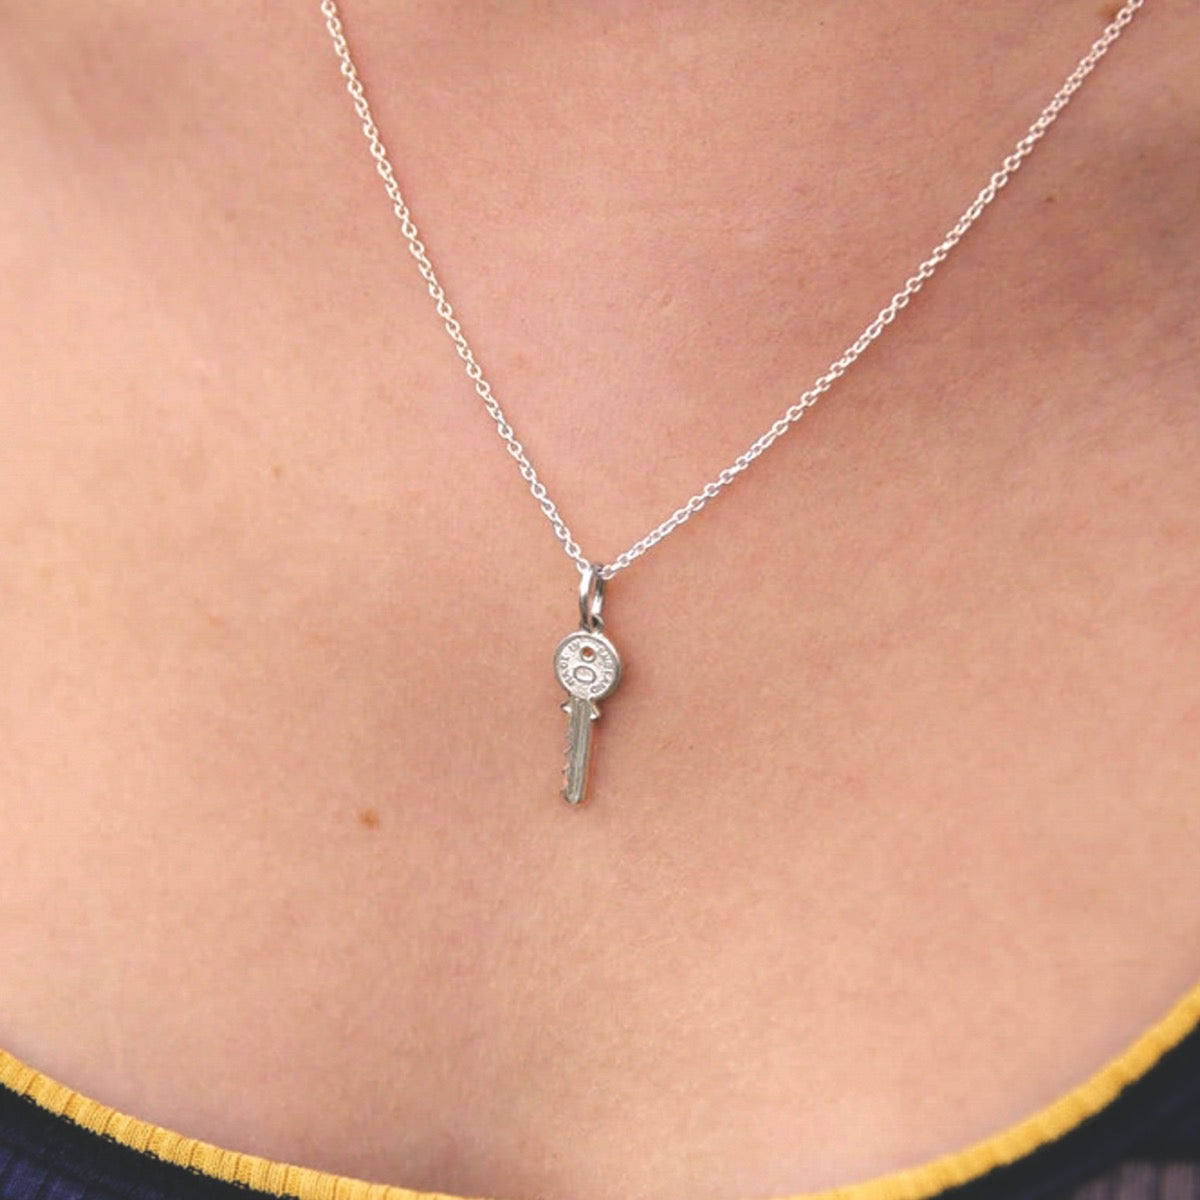 Top more than 131 tiny key necklace best